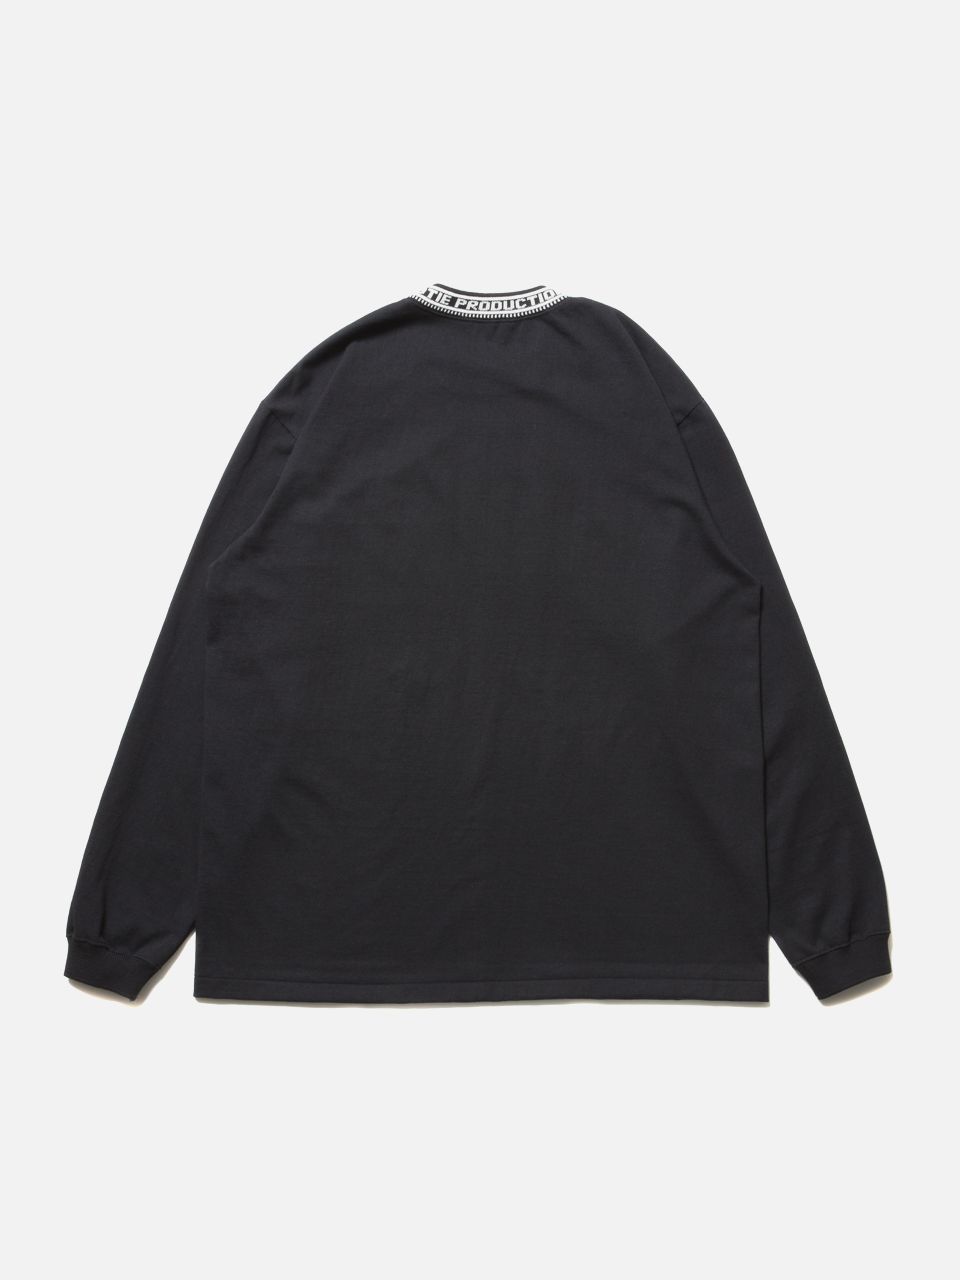 COOTIE クーティ 通販 19SS Jacquard Collar L/S Tee